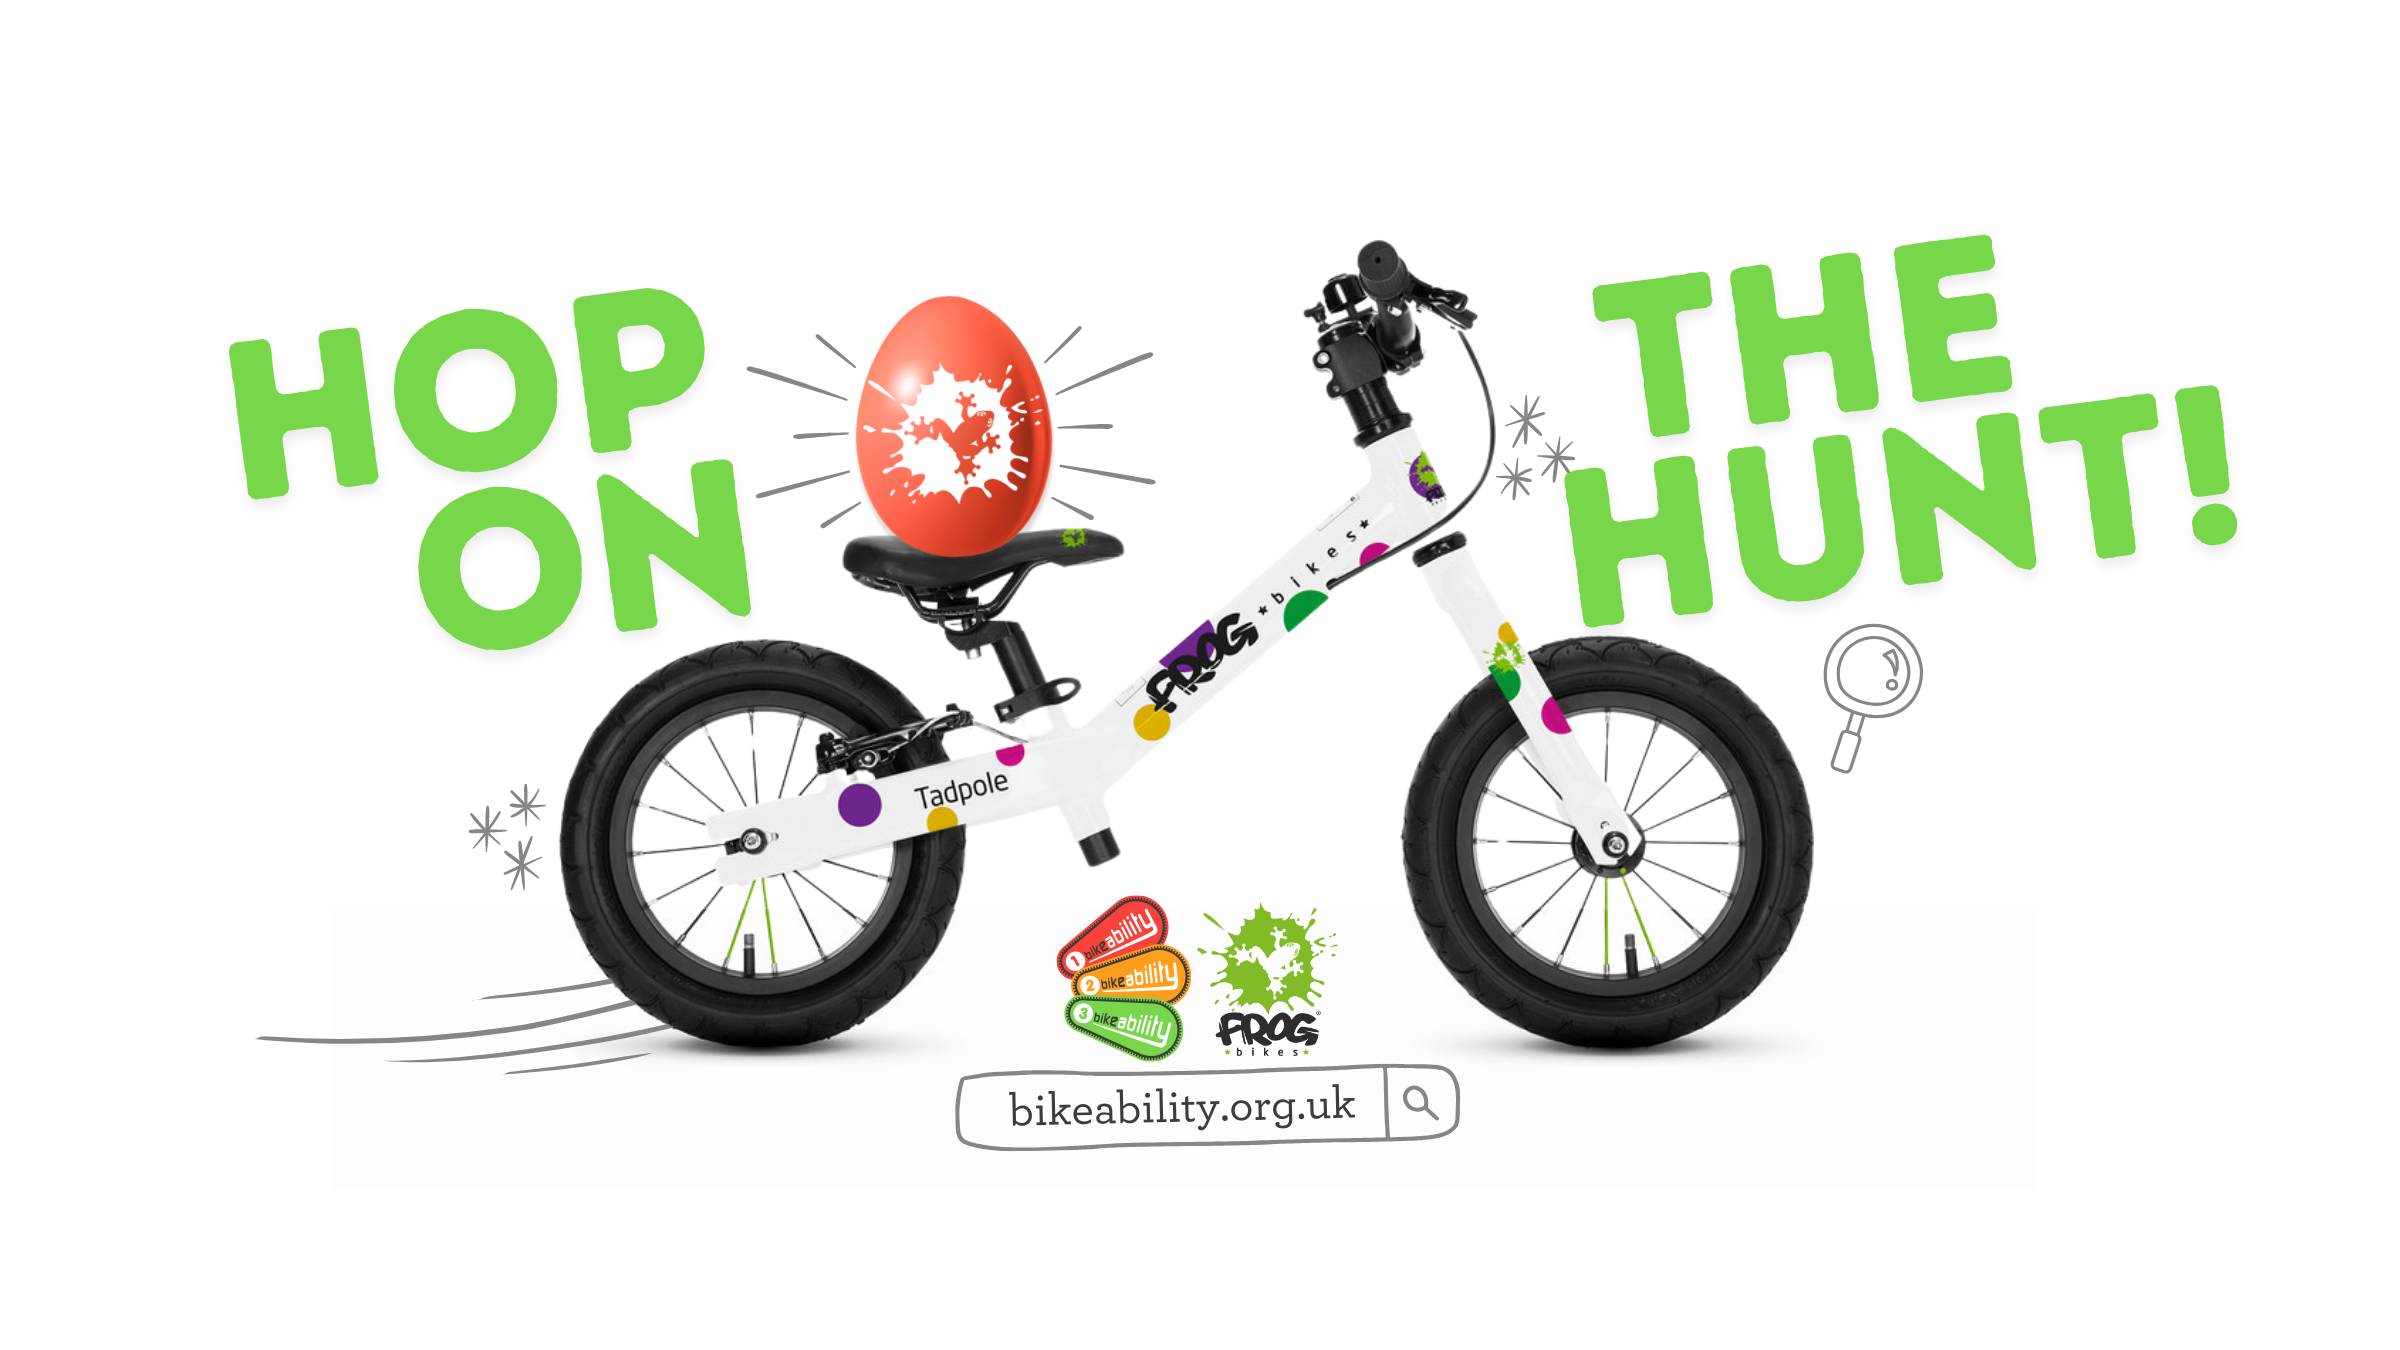 Graphic for Bikeability & Frog Bikes Easter Egg Hunt campaign. A Frog Tadpole balance bike is carrying a Frog easter egg on its saddle. Text reads: "Hop on the hunt!"